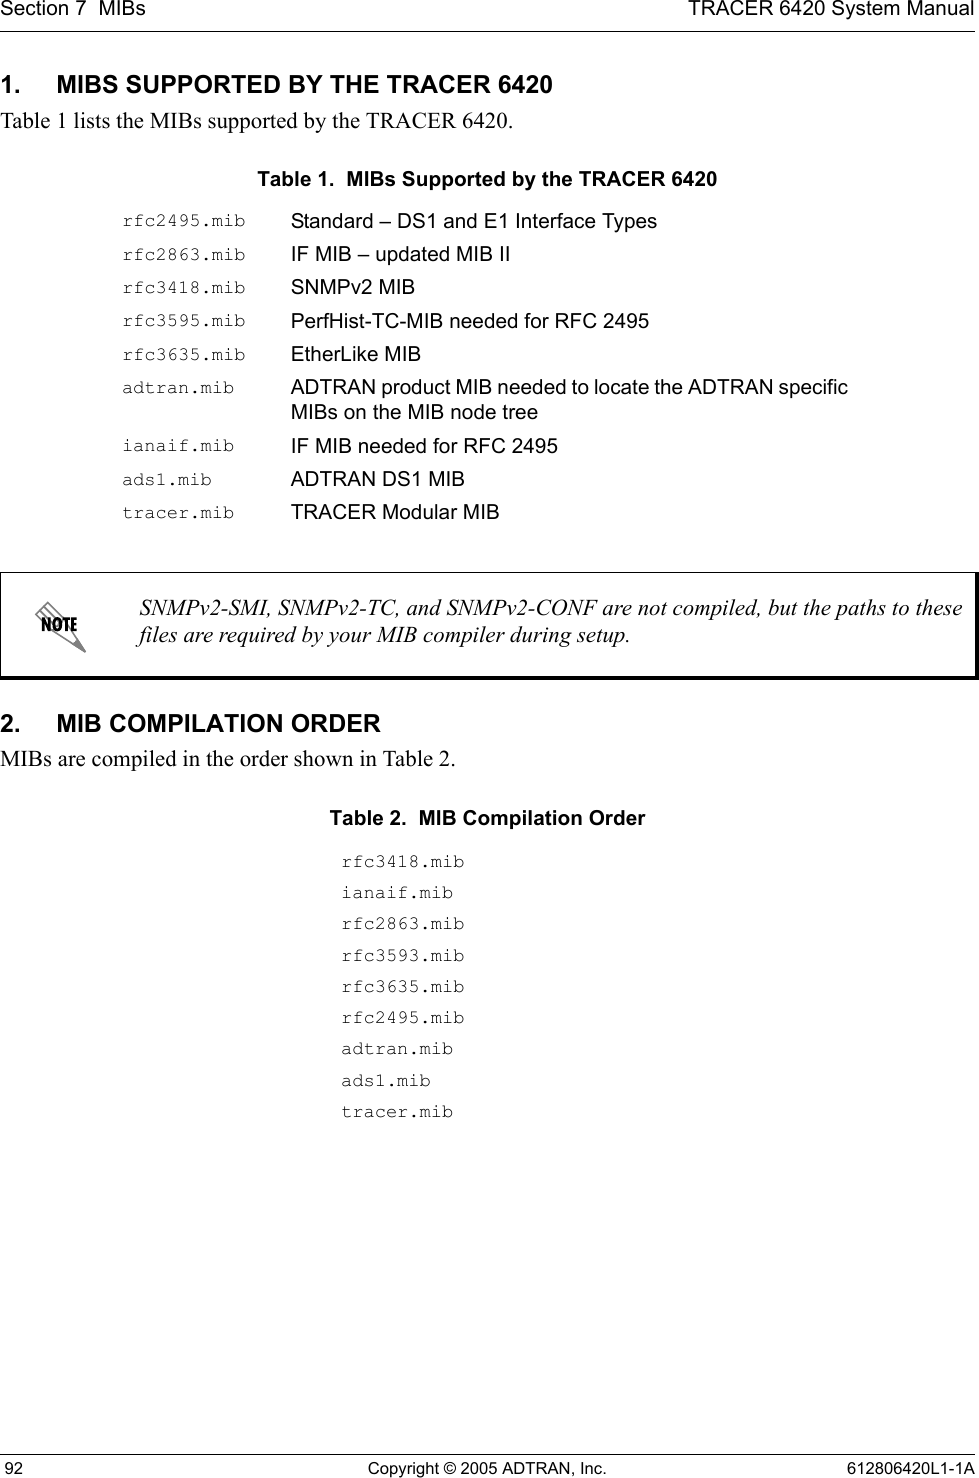 Section 7  MIBs TRACER 6420 System Manual 92 Copyright © 2005 ADTRAN, Inc. 612806420L1-1A1. MIBS SUPPORTED BY THE TRACER 6420Table 1 lists the MIBs supported by the TRACER 6420.2. MIB COMPILATION ORDERMIBs are compiled in the order shown in Table 2.Table 1.  MIBs Supported by the TRACER 6420rfc2495.mib Standard – DS1 and E1 Interface Typesrfc2863.mib IF MIB – updated MIB IIrfc3418.mib SNMPv2 MIBrfc3595.mib PerfHist-TC-MIB needed for RFC 2495rfc3635.mib EtherLike MIBadtran.mib ADTRAN product MIB needed to locate the ADTRAN specific MIBs on the MIB node treeianaif.mib IF MIB needed for RFC 2495ads1.mib ADTRAN DS1 MIBtracer.mib TRACER Modular MIBSNMPv2-SMI, SNMPv2-TC, and SNMPv2-CONF are not compiled, but the paths to these files are required by your MIB compiler during setup. Table 2.  MIB Compilation Orderrfc3418.mibianaif.mibrfc2863.mibrfc3593.mibrfc3635.mibrfc2495.mibadtran.mibads1.mibtracer.mib